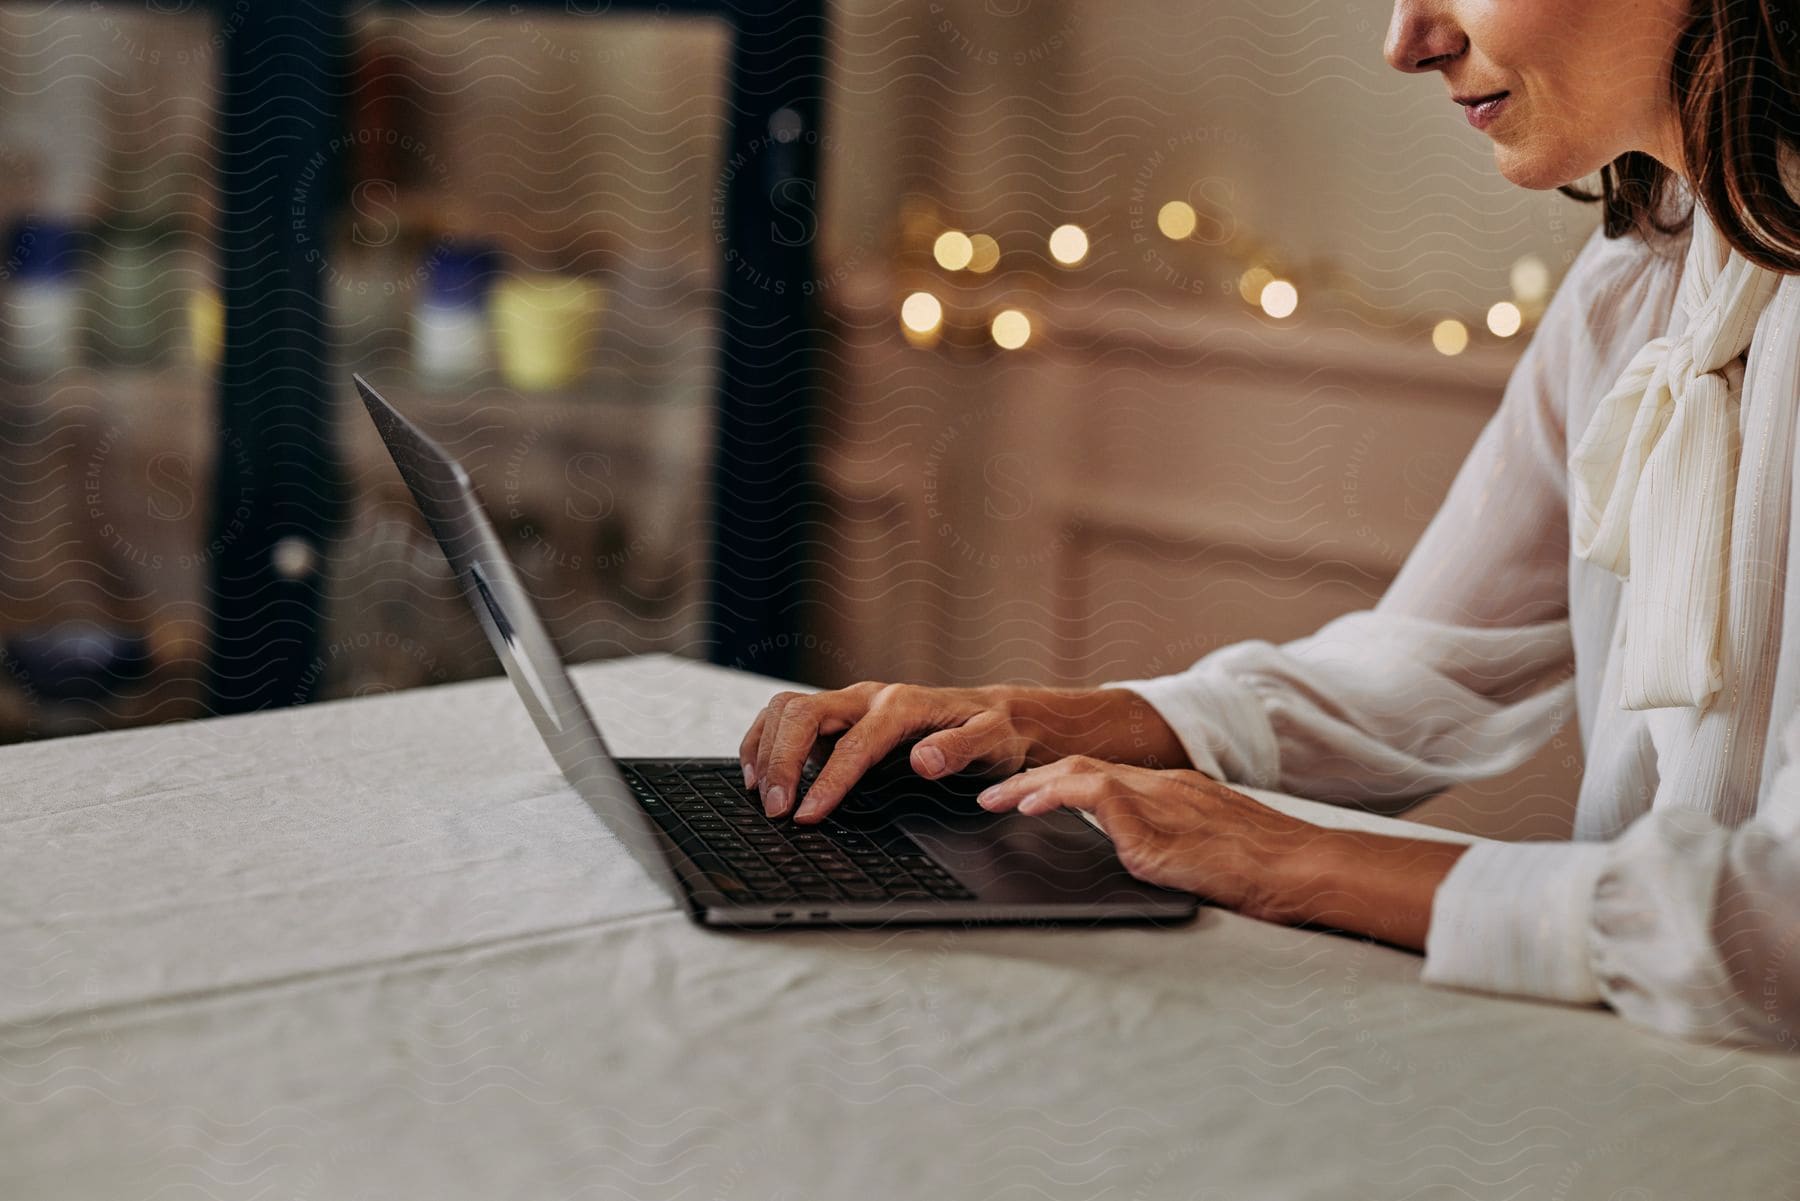 Stock photo of woman with a white shirt sits at table working on a laptop